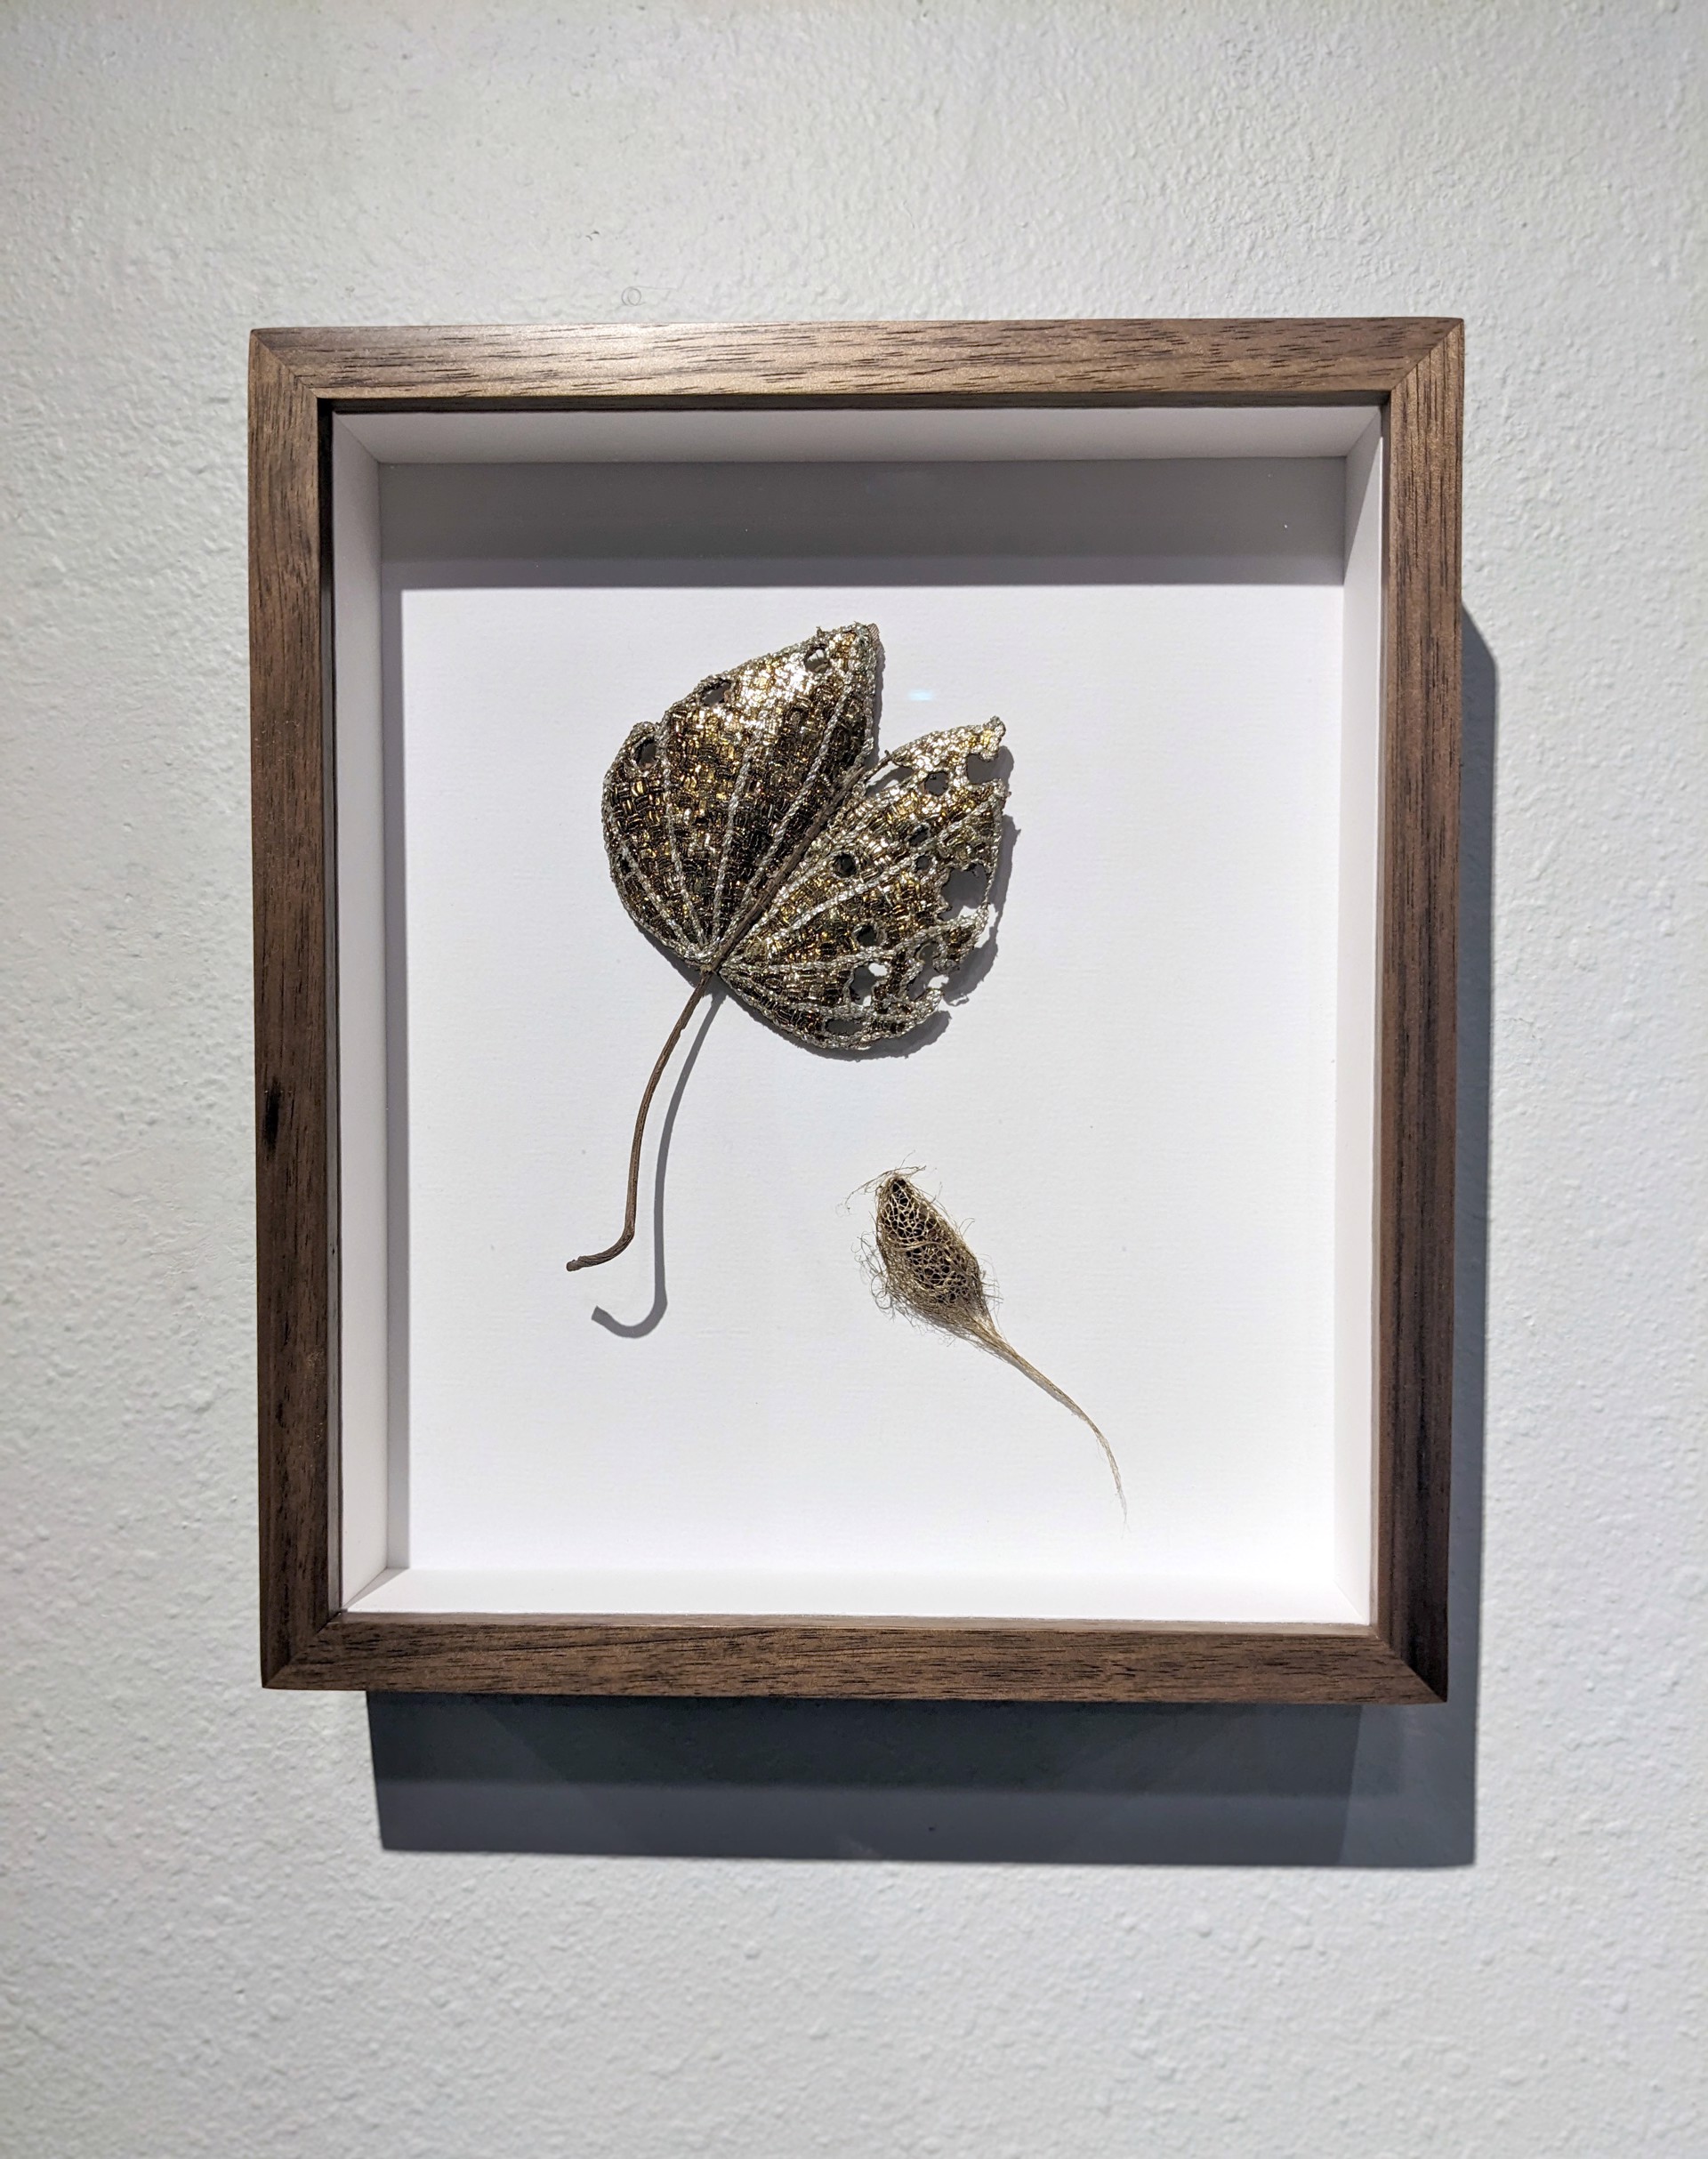 The Impermanence of Life: Bauhinia Leaf II by Tiao Nithakhong Somsanith